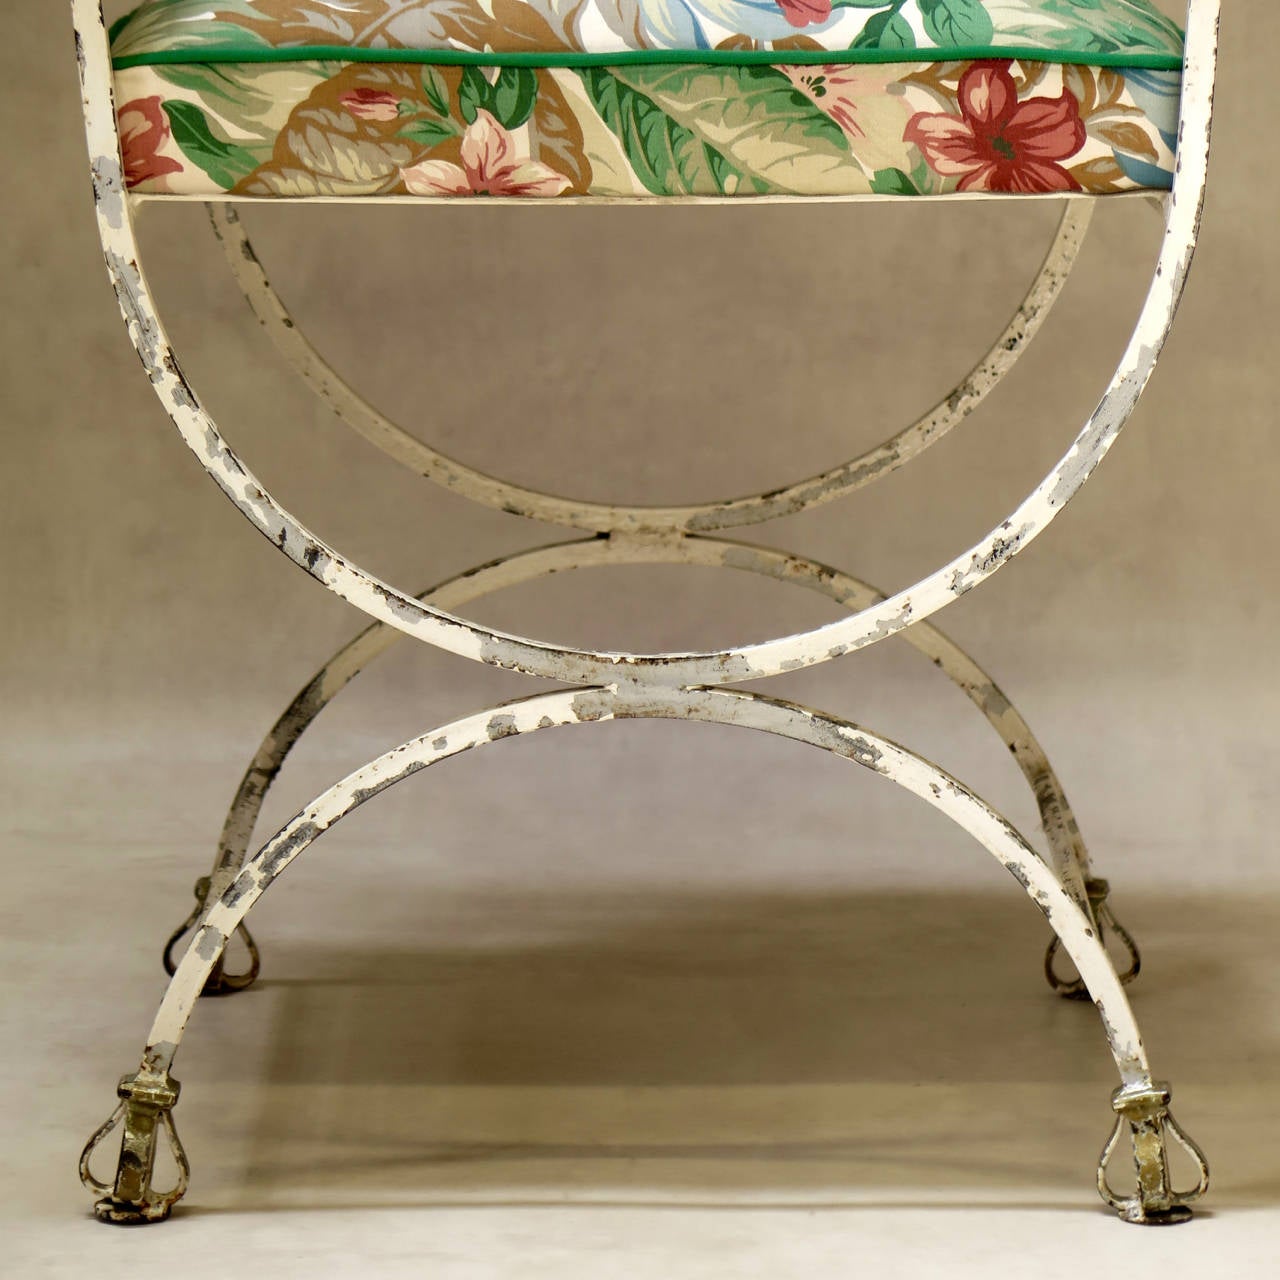 Art Deco Upholstered Iron Armchair with Crown Detail, France, 1940s For Sale 3